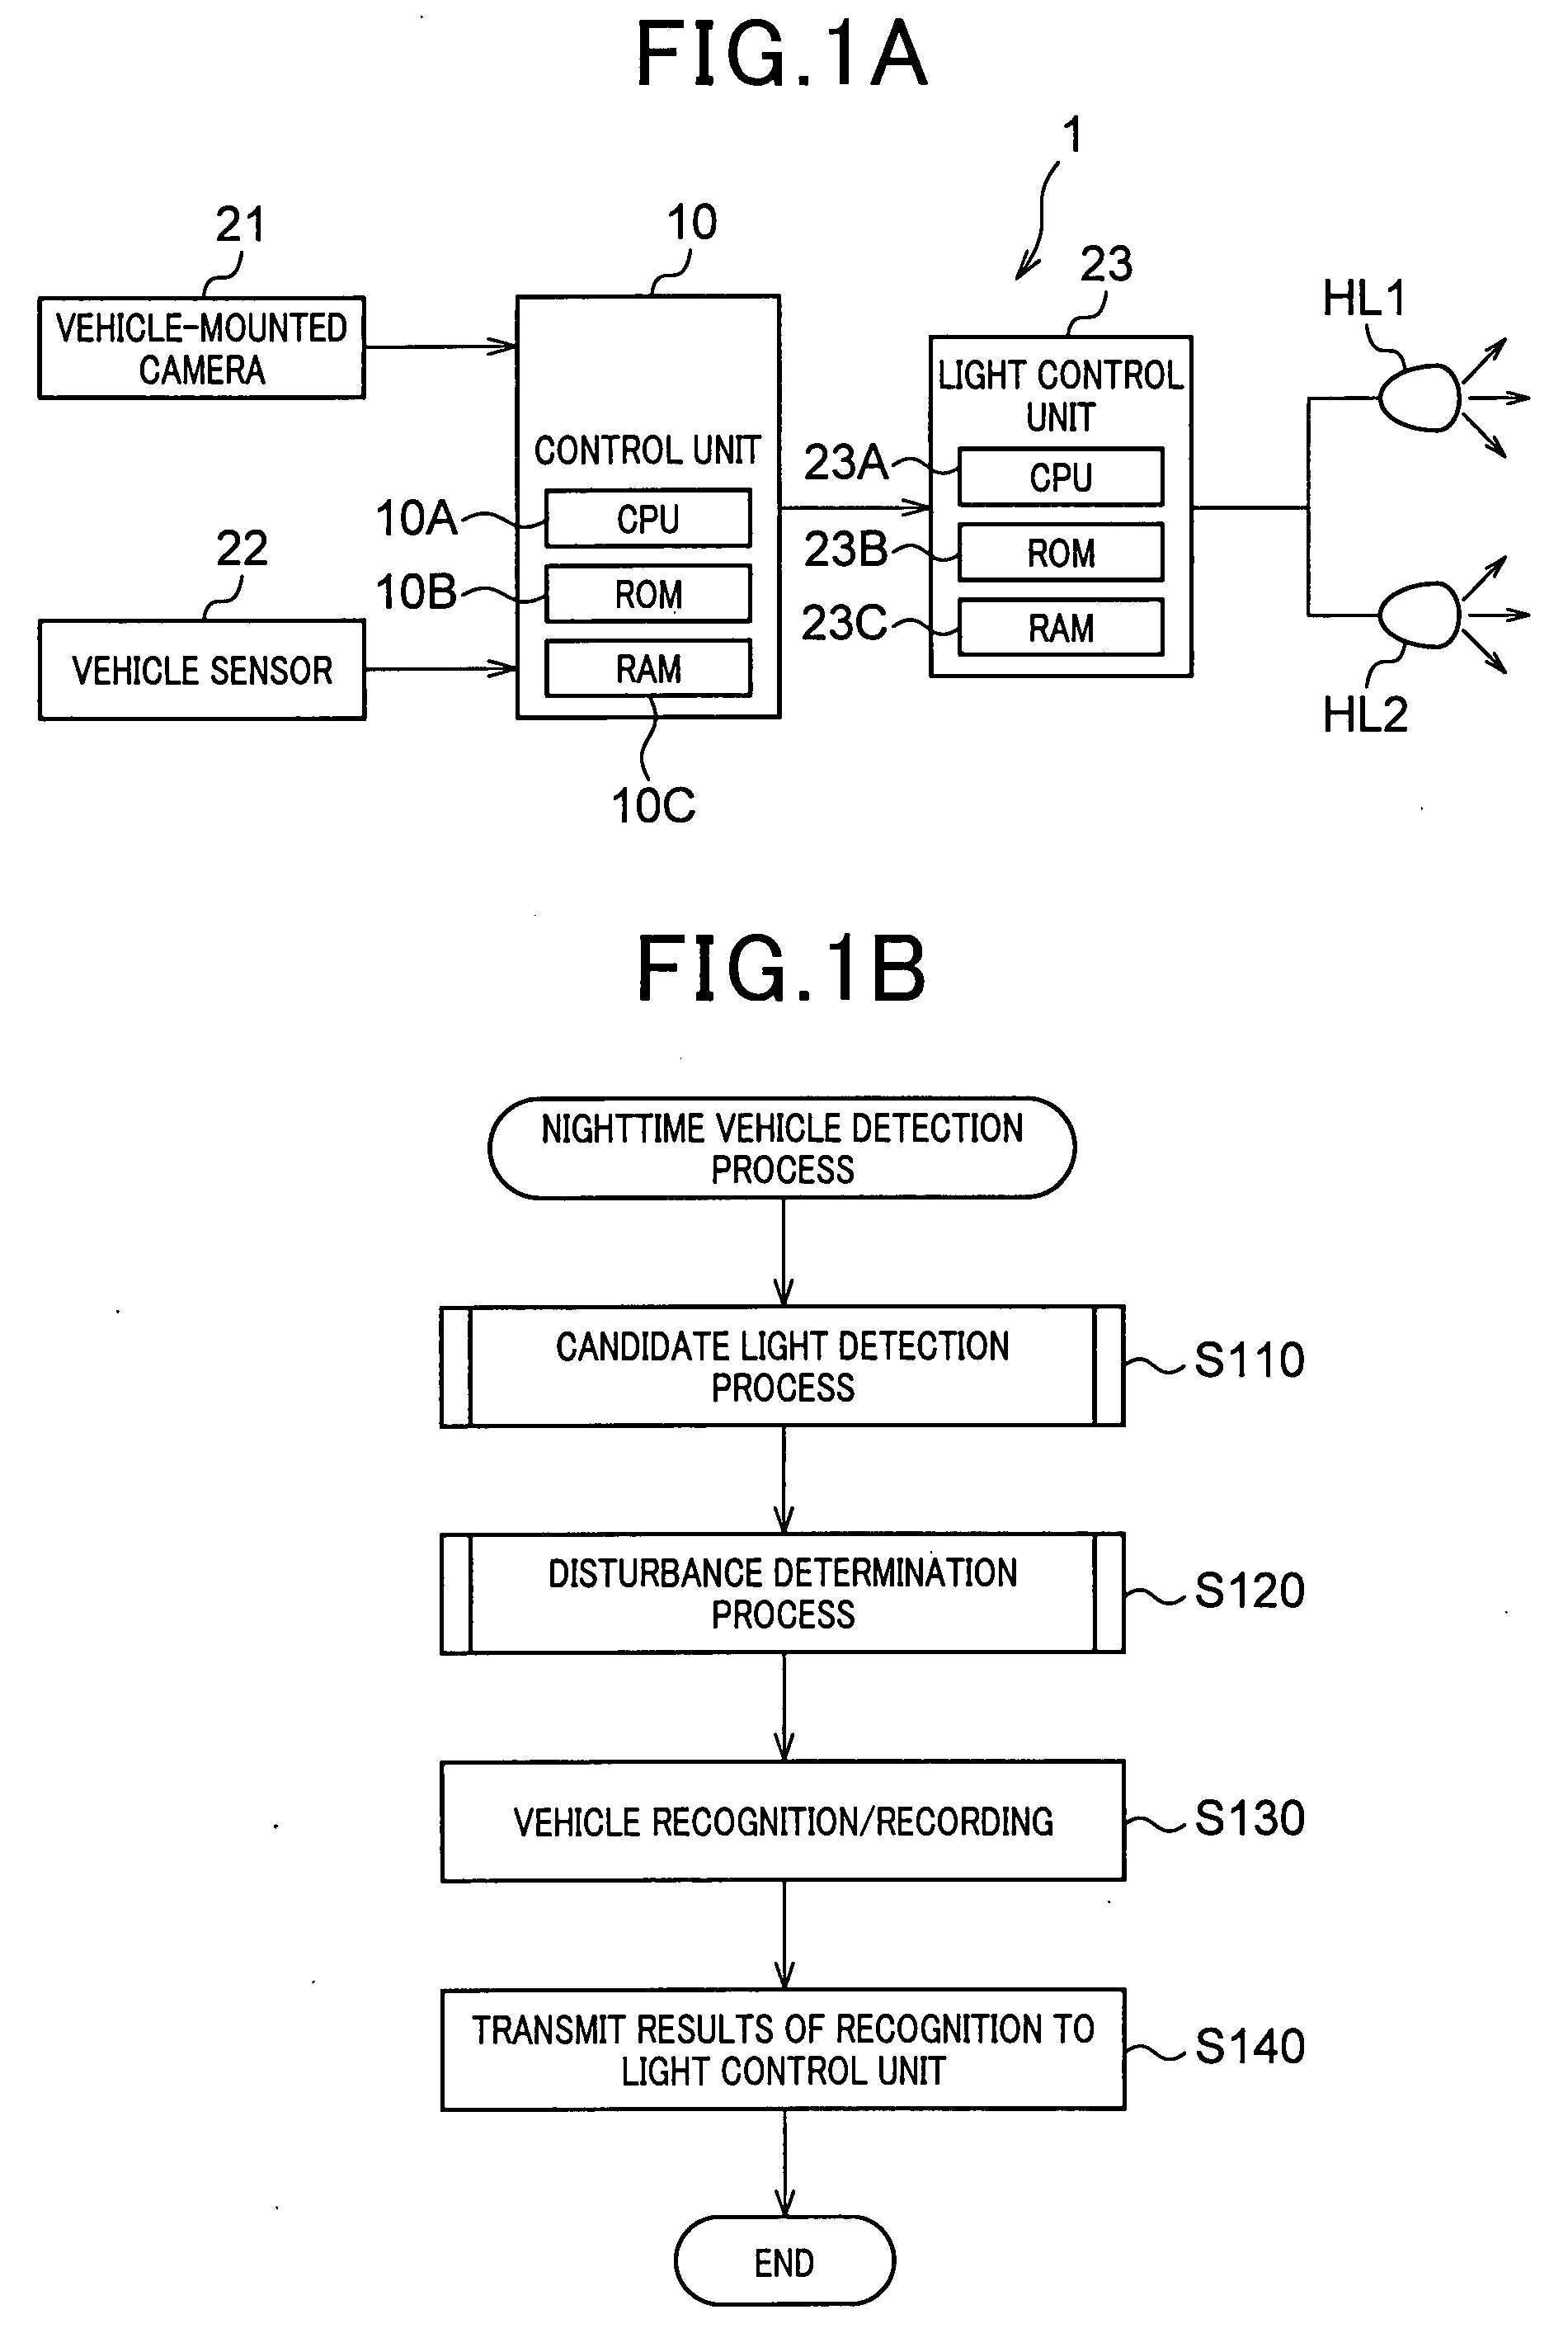 Apparatus and method for detecting vehicles by identifying light spots from captured images